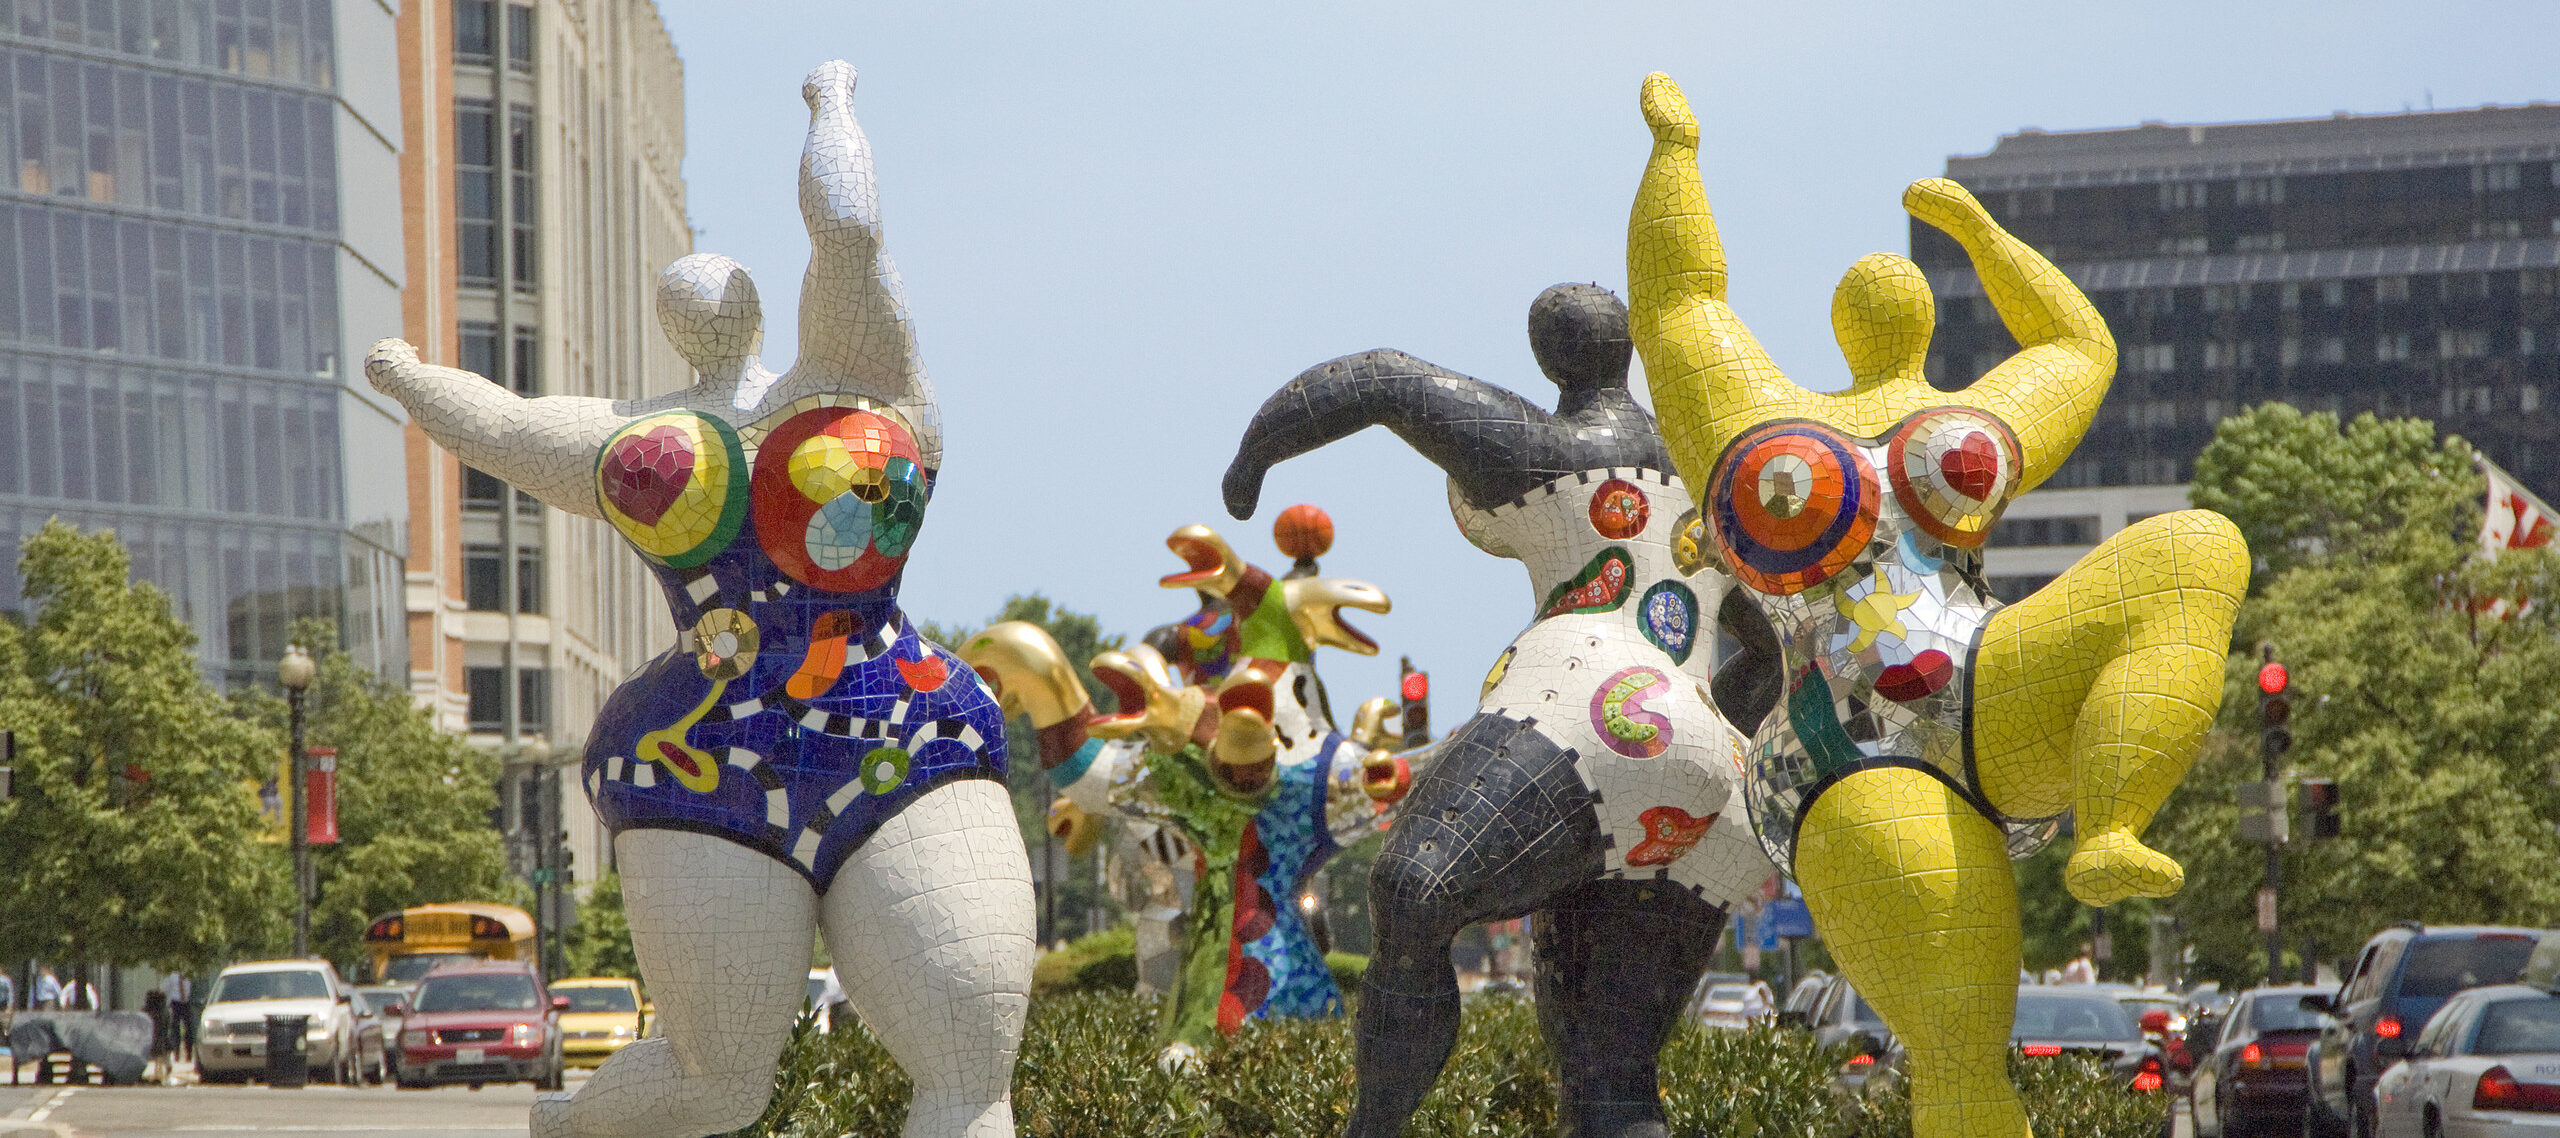 Three large figures are dancing along a street. The figures have no faces but womanly bodies. They are wearing colorful bikinis with hearts and flowers painted on them. The figures appear enormous compared to the cars standing nearby.